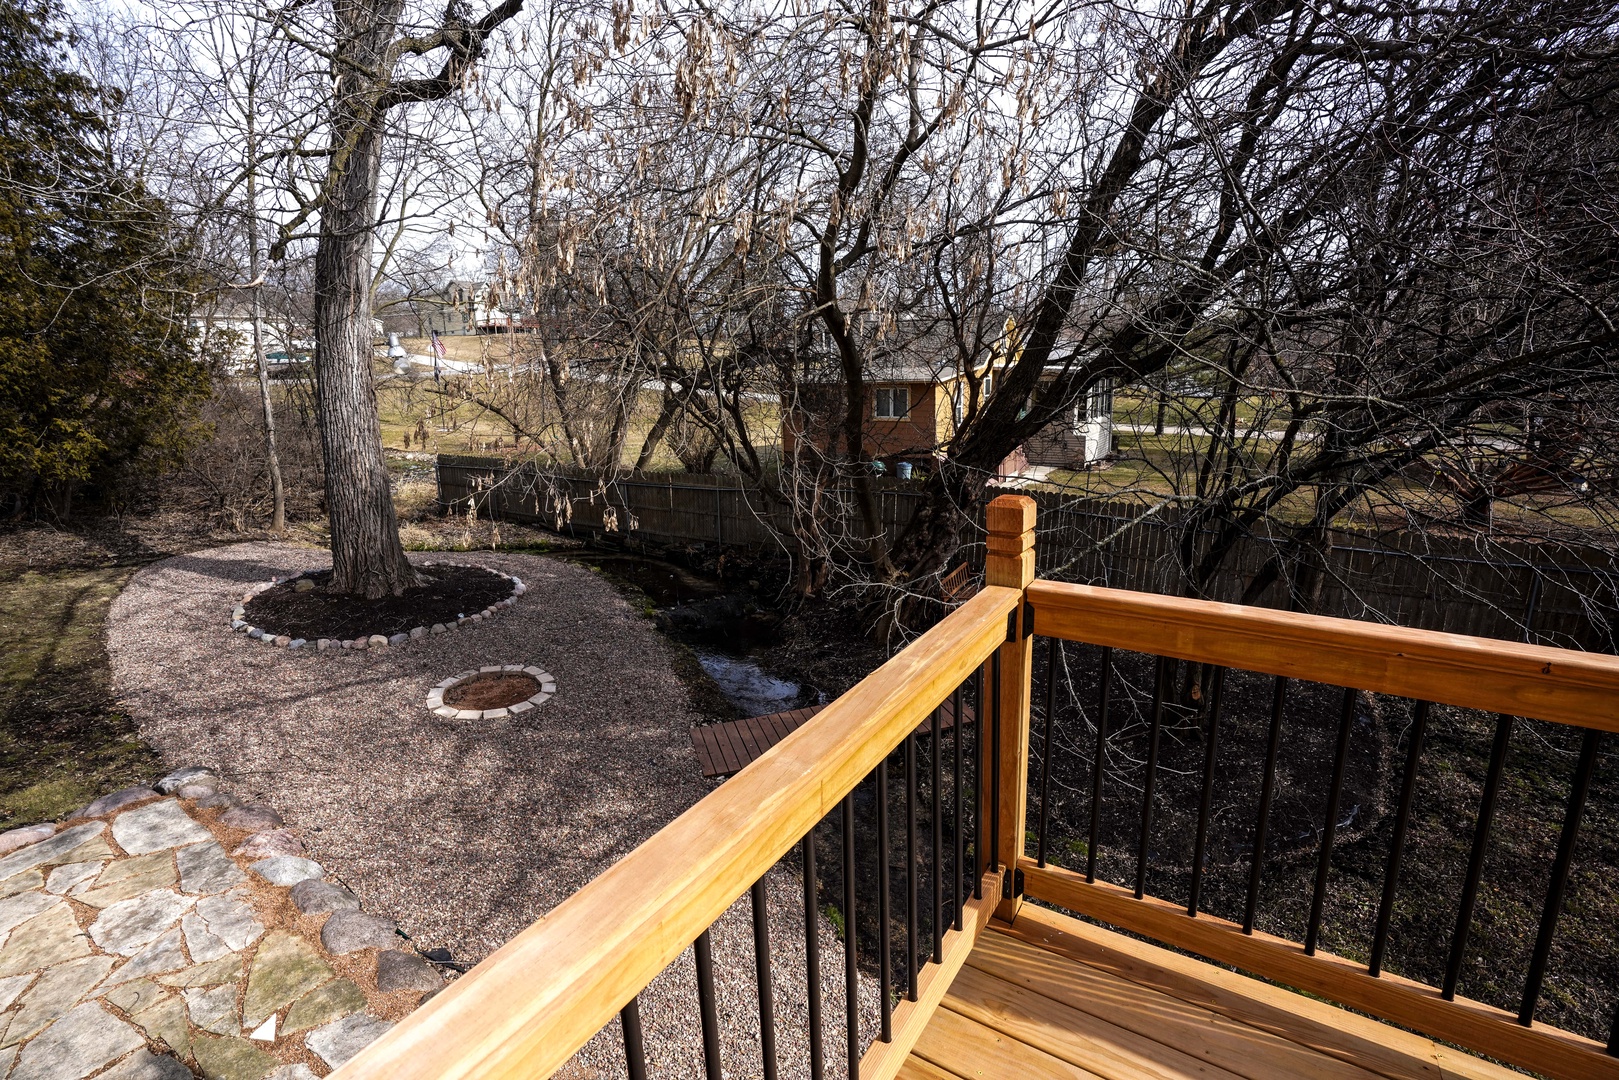 Peaceful sounds of the creek can be heard off of the 1st floor deck.